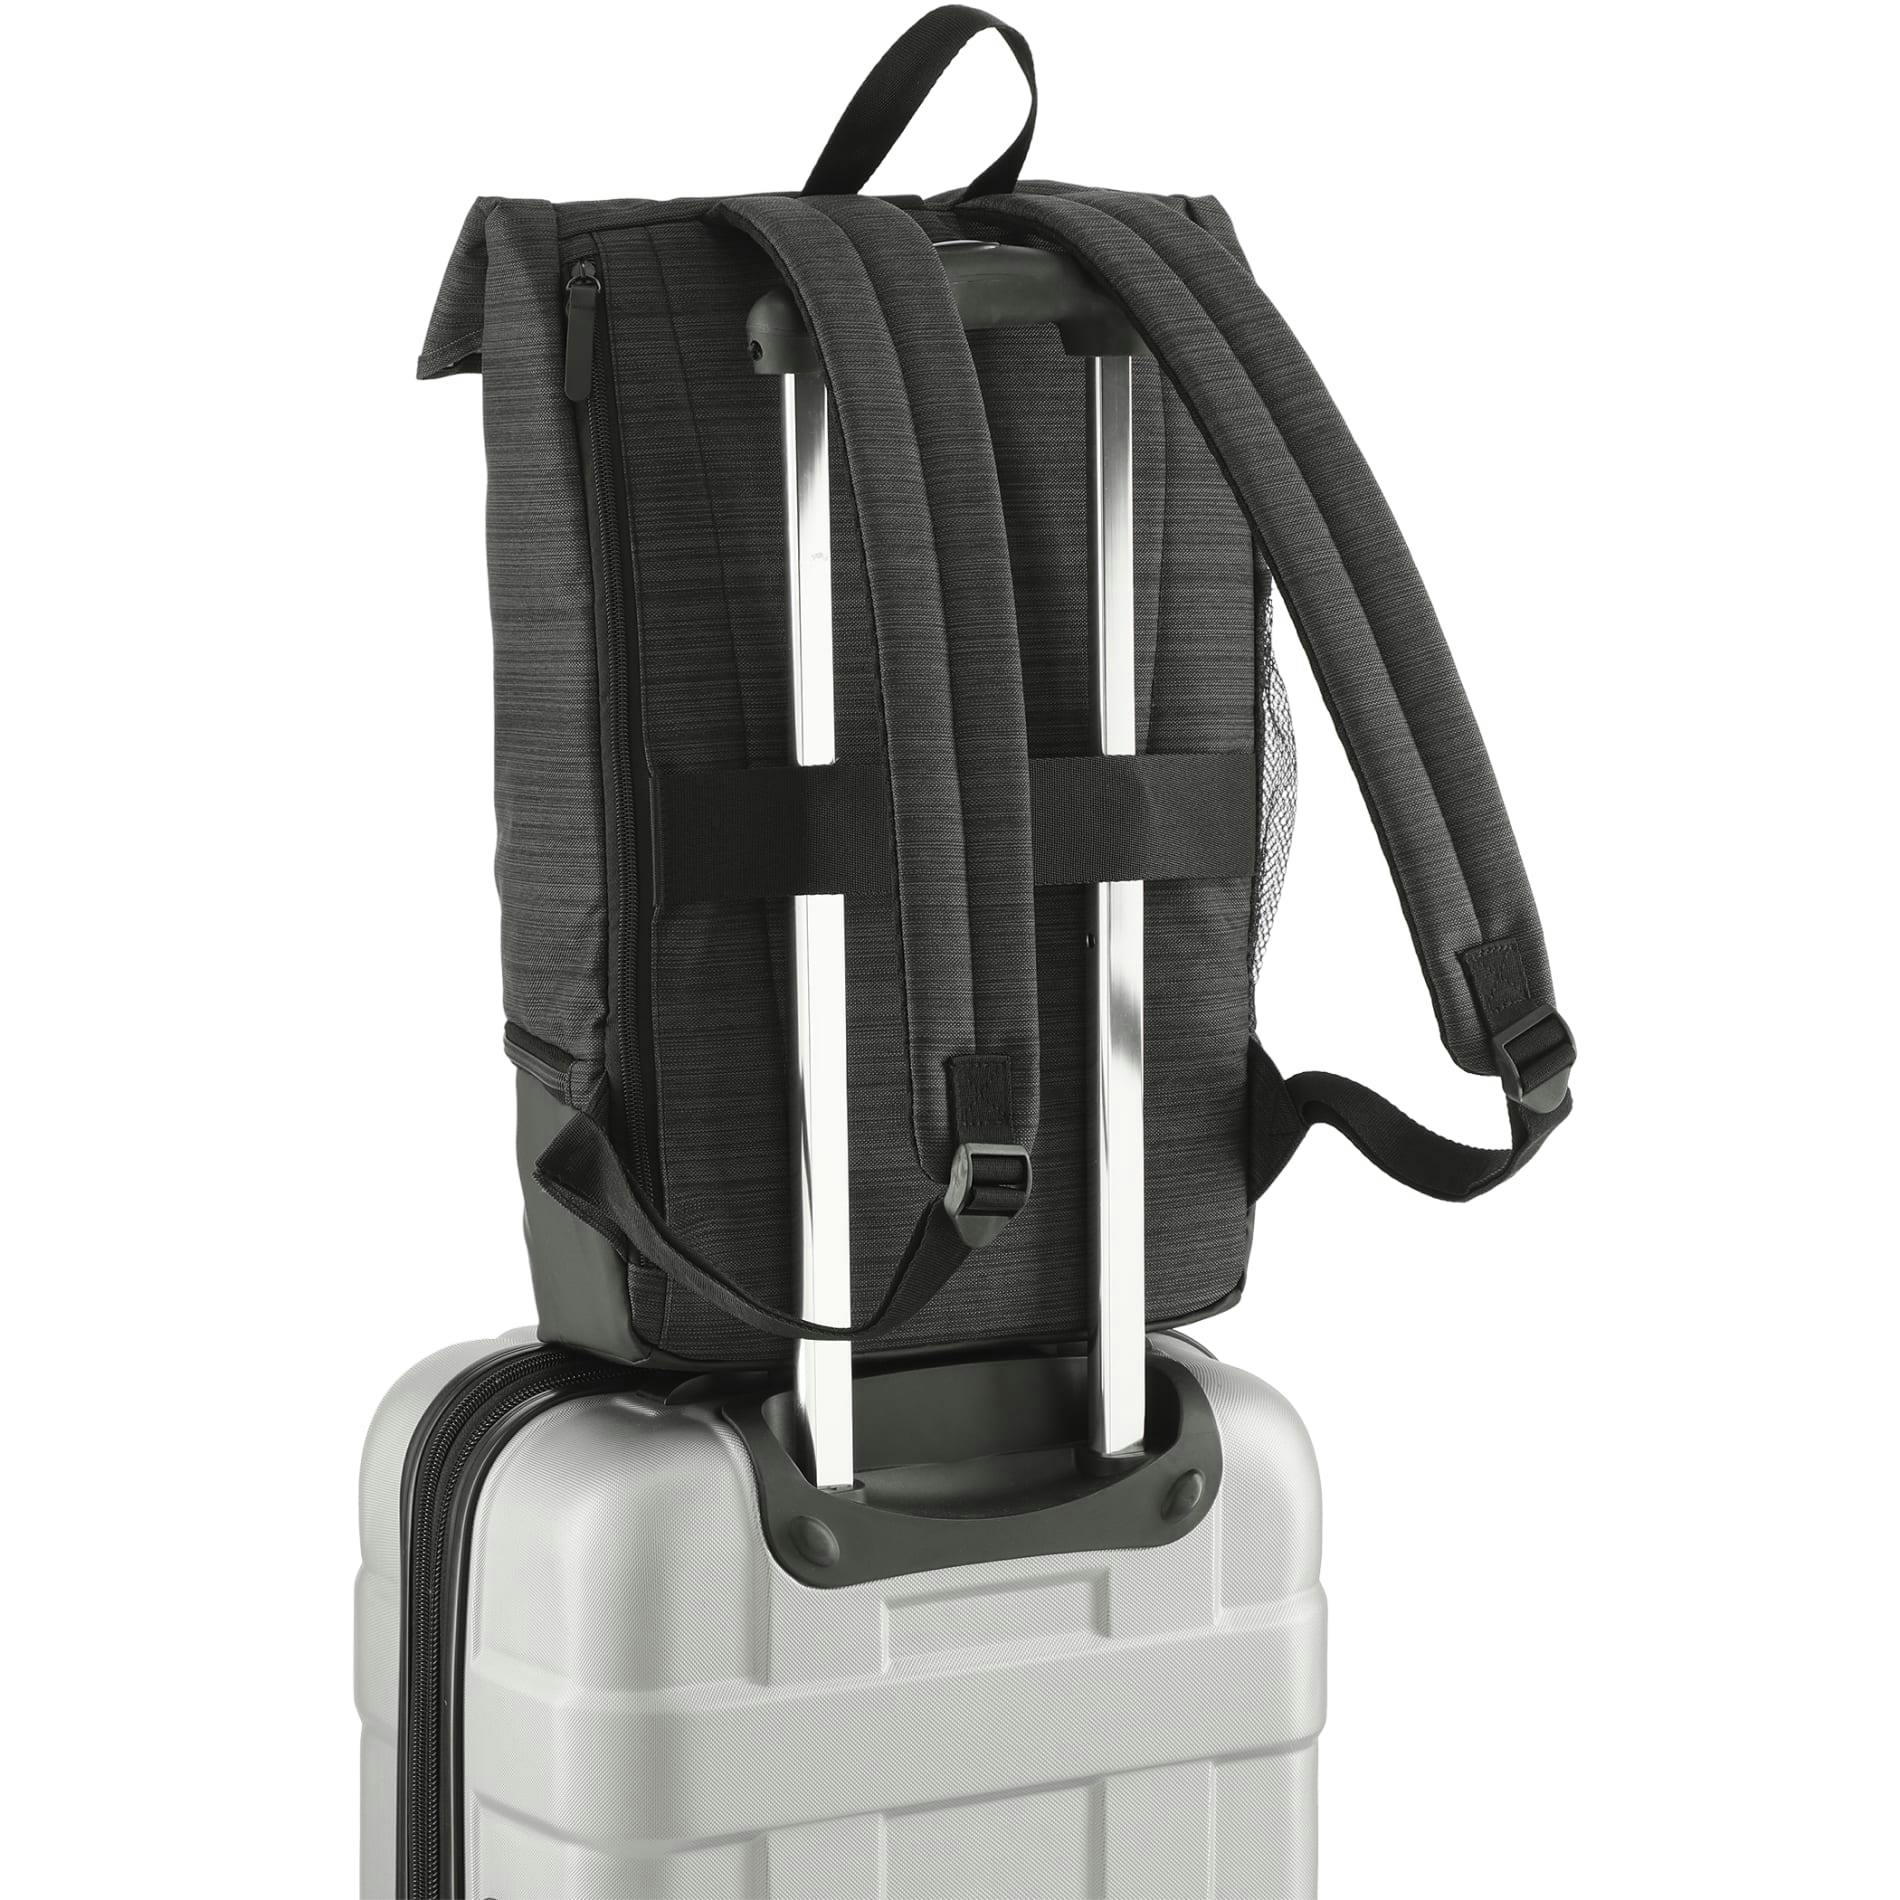 NBN Whitby Insulated 15" Computer Backpack - additional Image 5